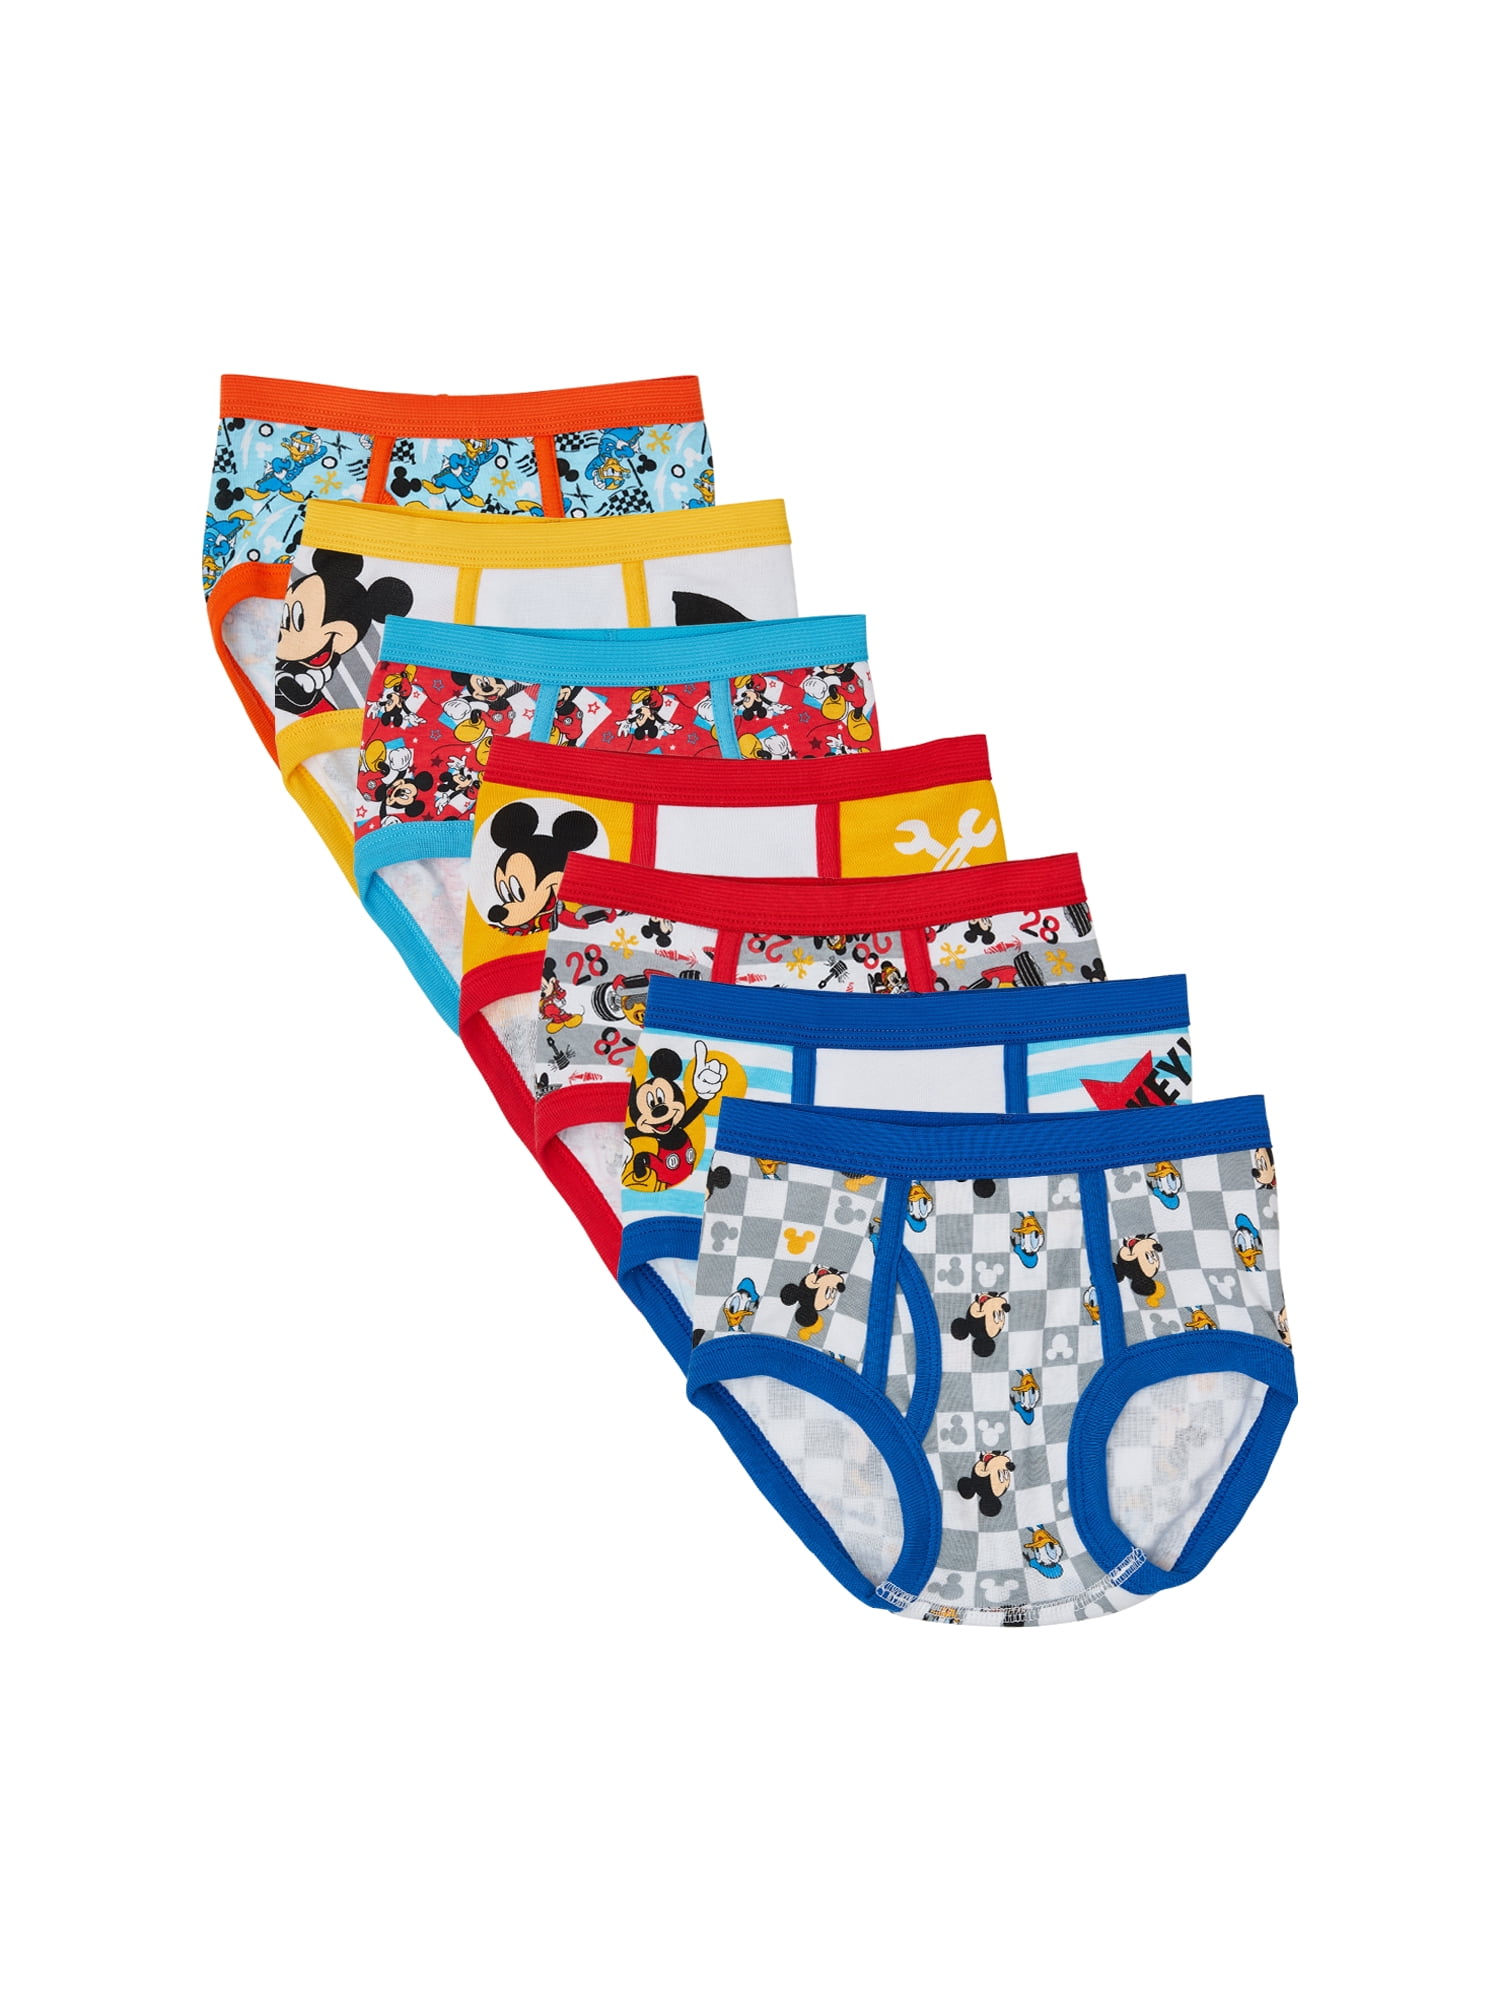 NEW Handcraft Little Boys Toddler Paw Patrol Brief Pack of 7 Assorted 2 3T 